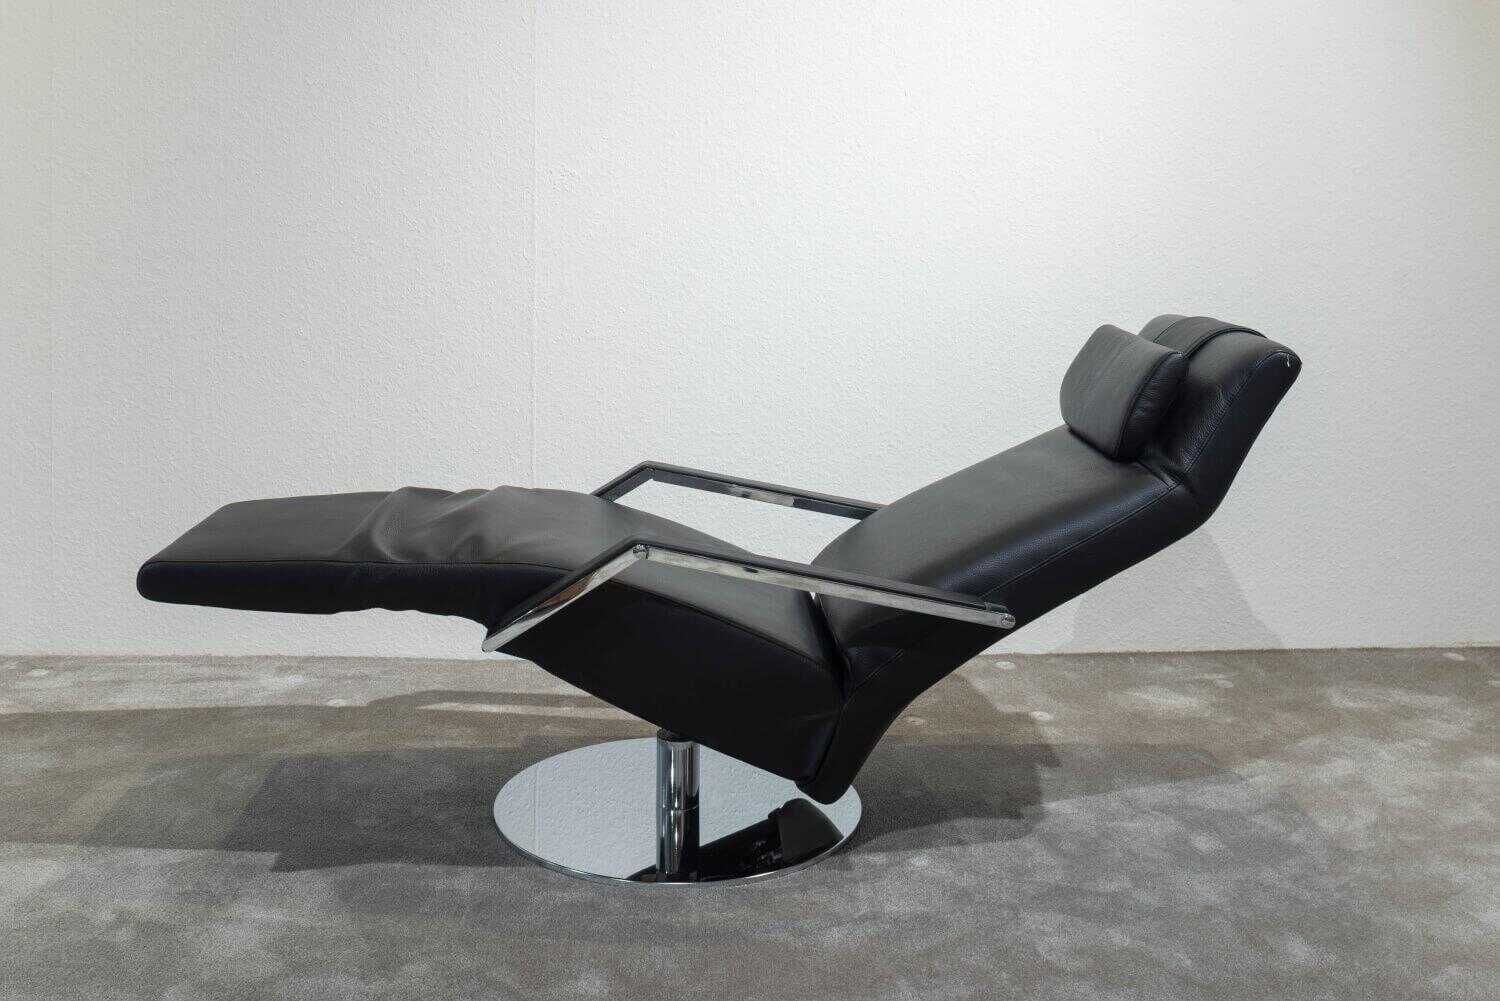 Relaxsessel Relax RE 400.15 Leder Schwarz Relaxfunktion